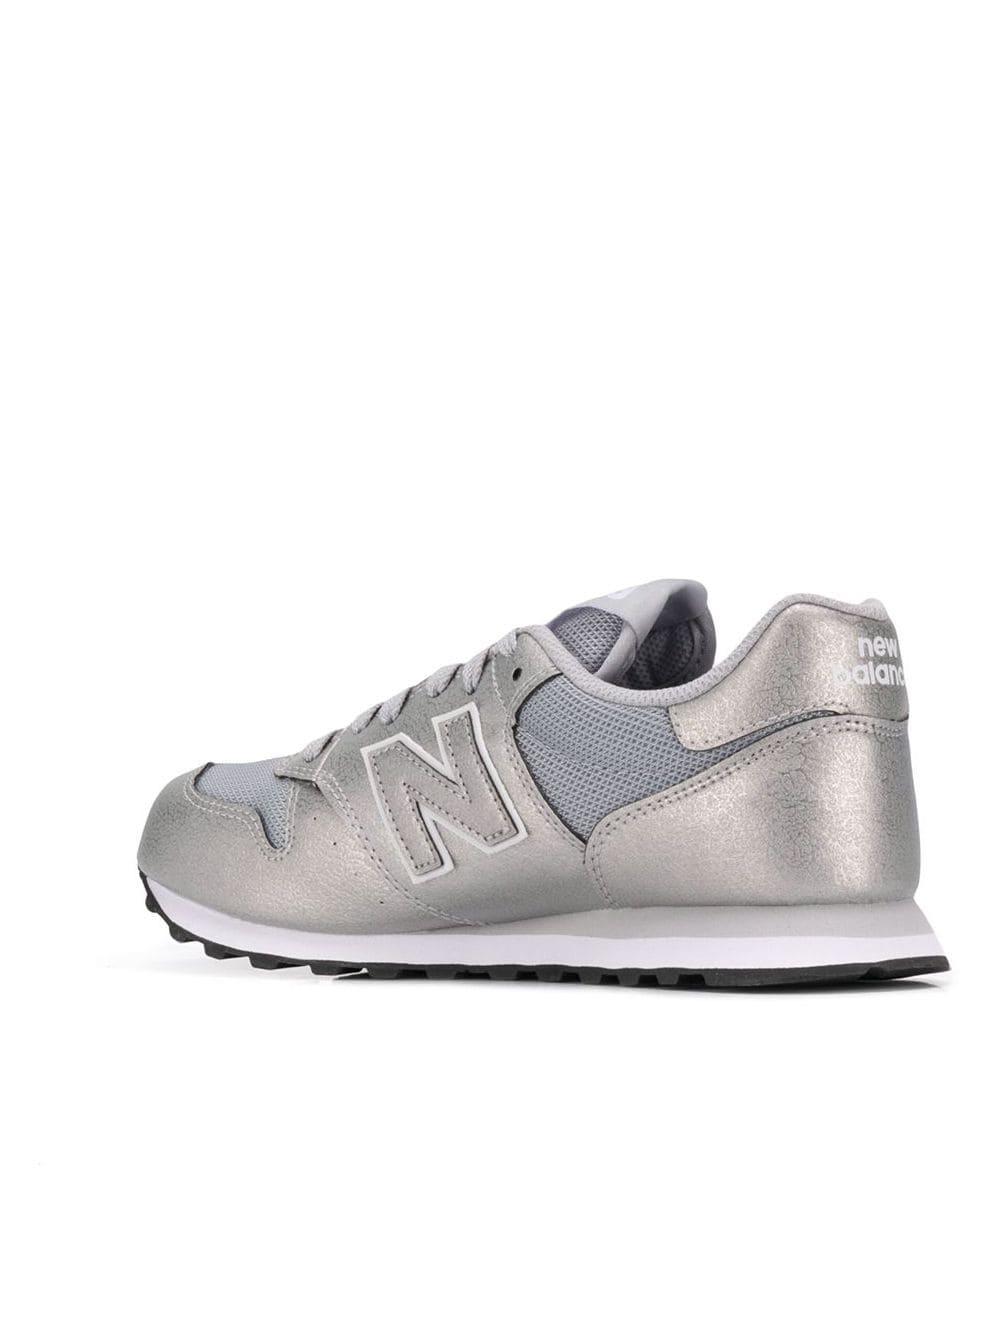 New Balance Leather 500 Sneakers in Silver (Metallic) | Lyst الشوفان